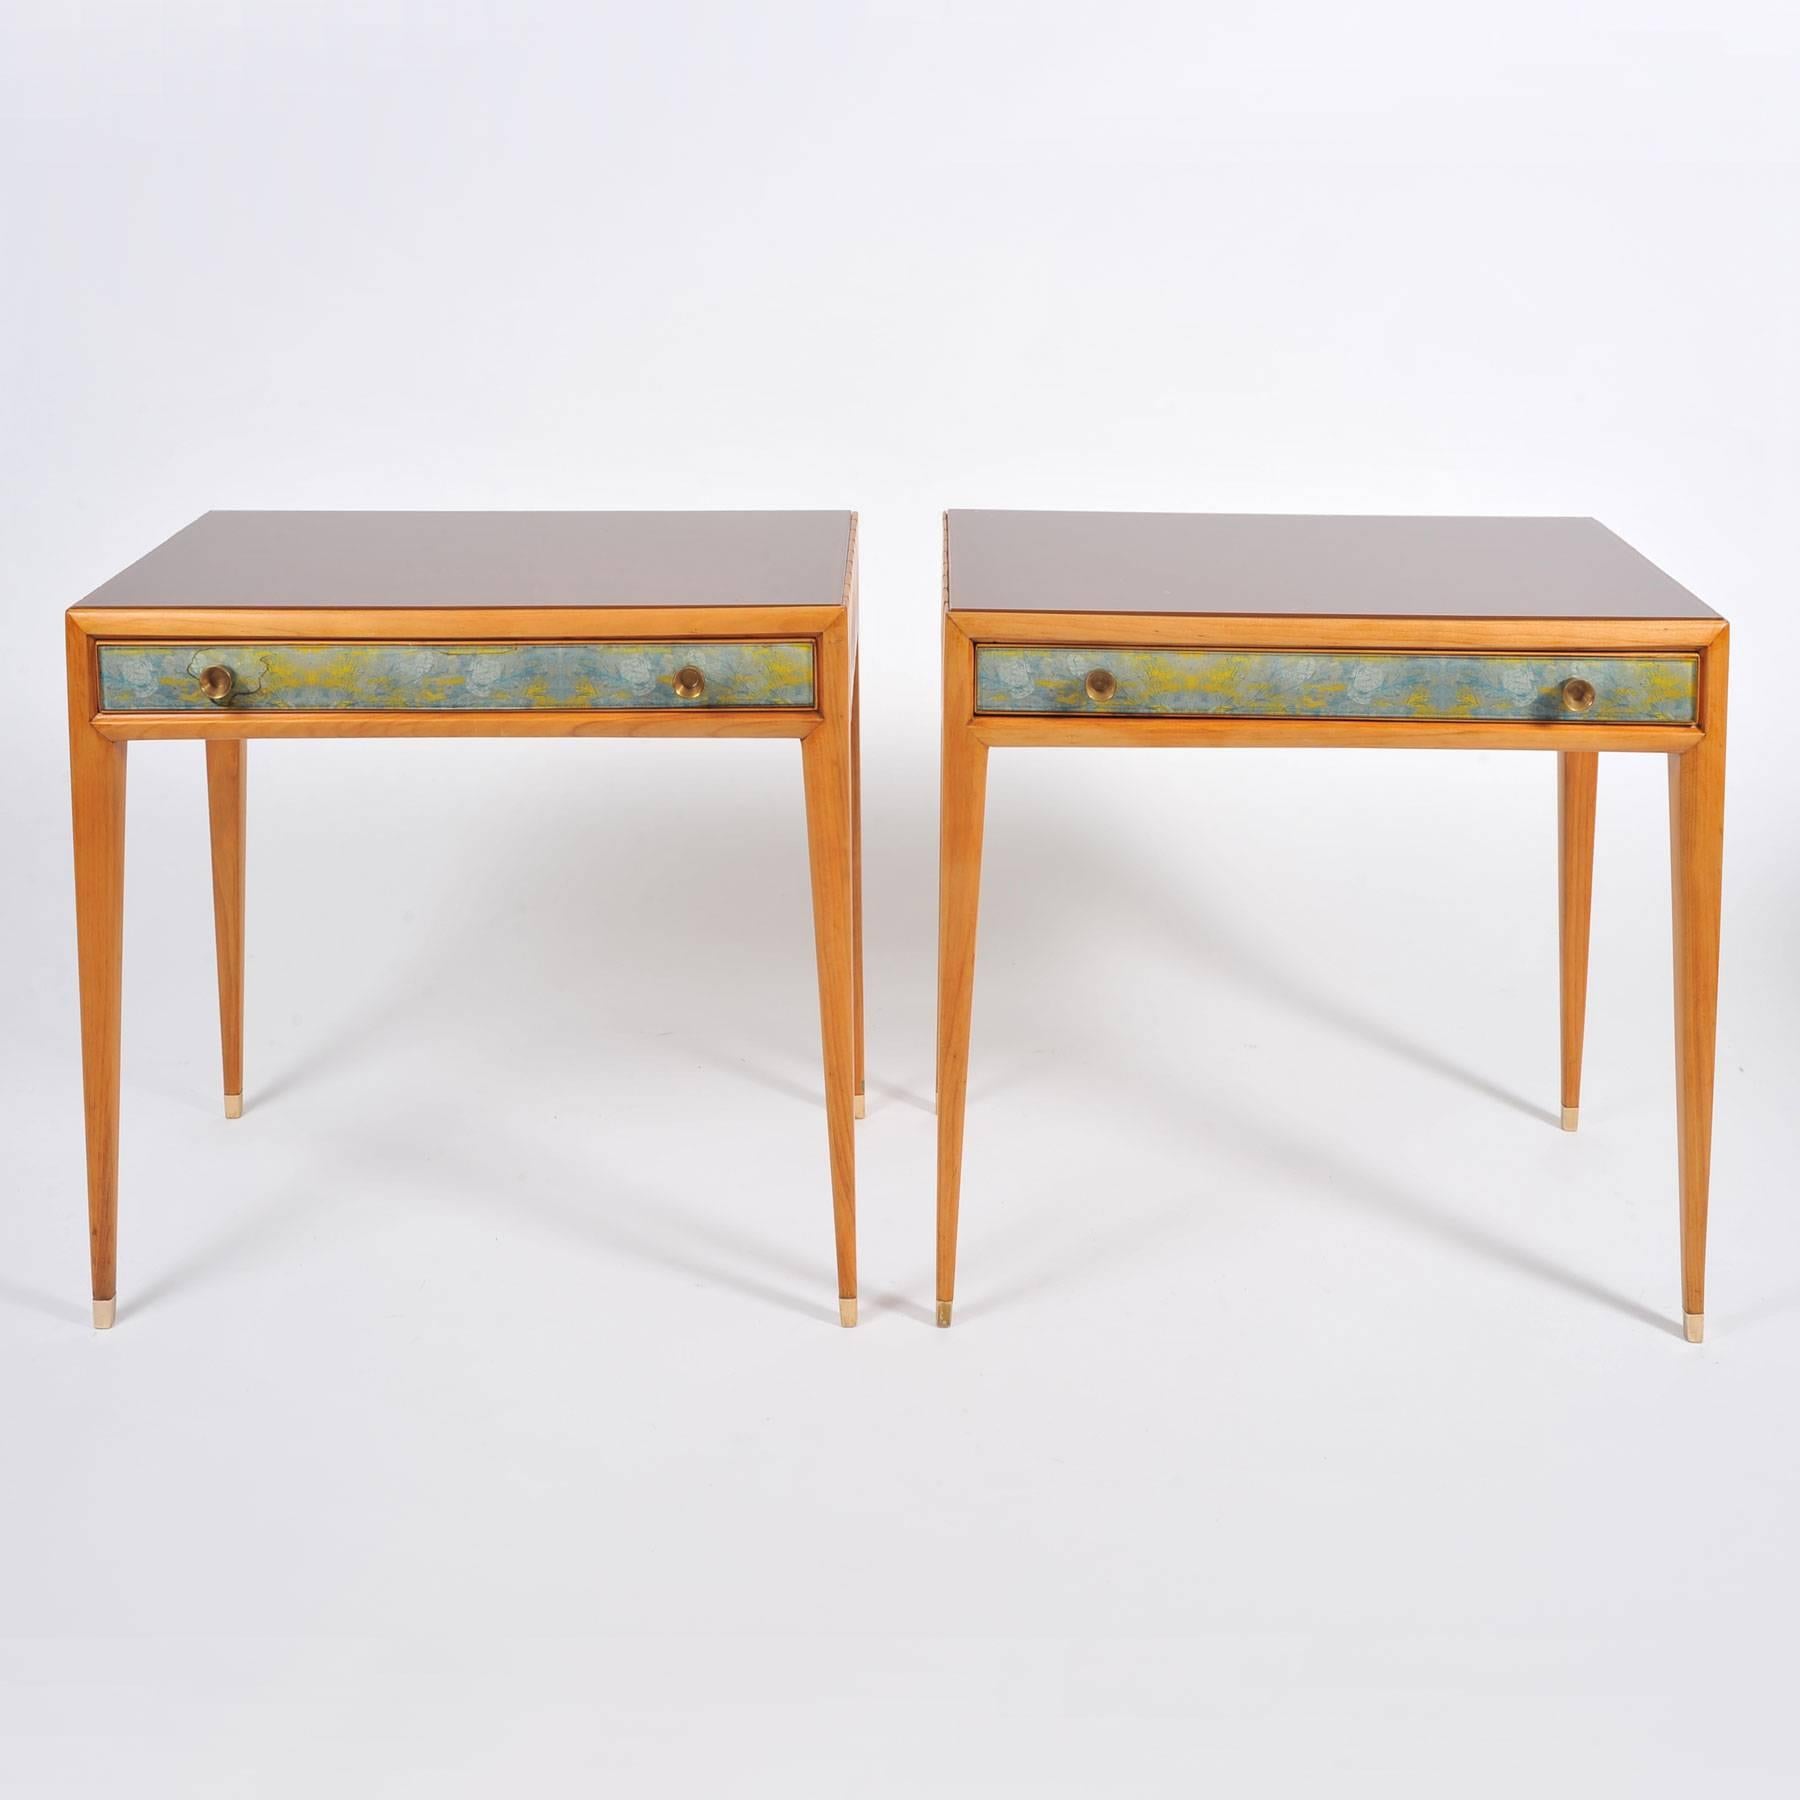 Elegant and rare nightstands/bedsides fronted with reverse-painted abstract designs in soft blues greens and gold by Osvaldo Borsani and Adriano Spilimbergo. Each drawer has two original circular brass handles. Rich pear wood with warm amber